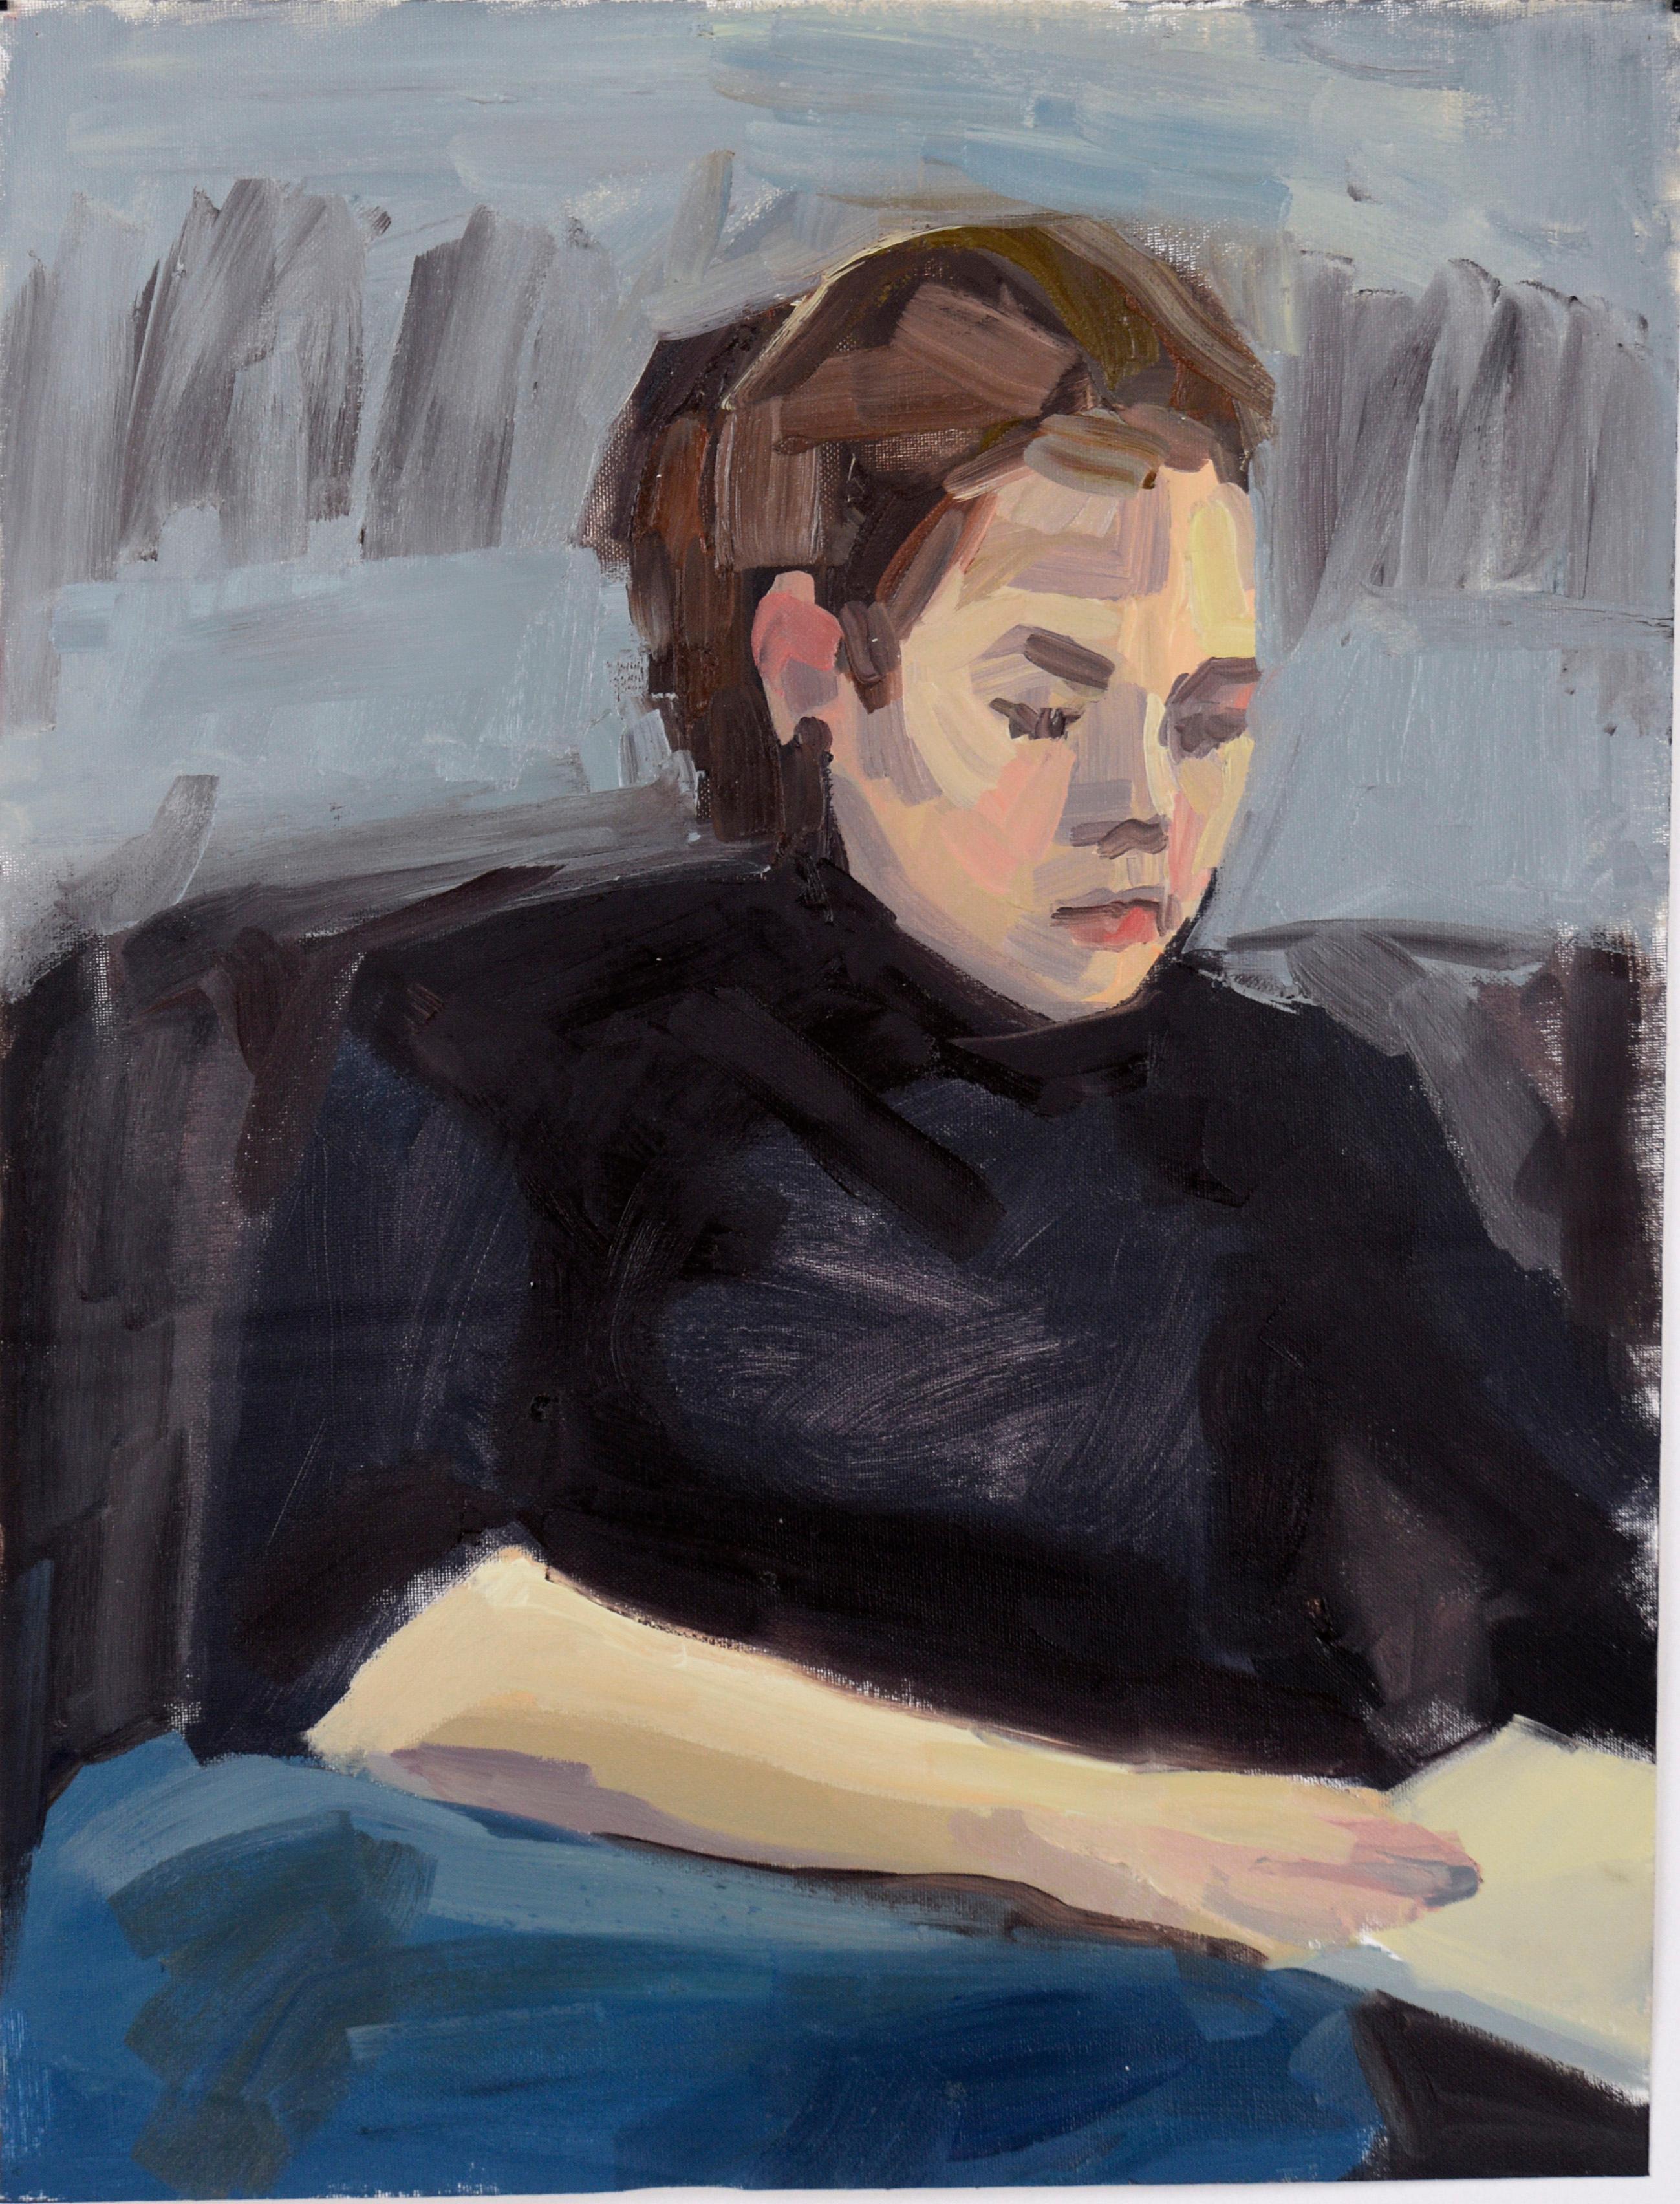 Portrait of a Woman Reading - Bay Area Figurative School Abstract Expressionist